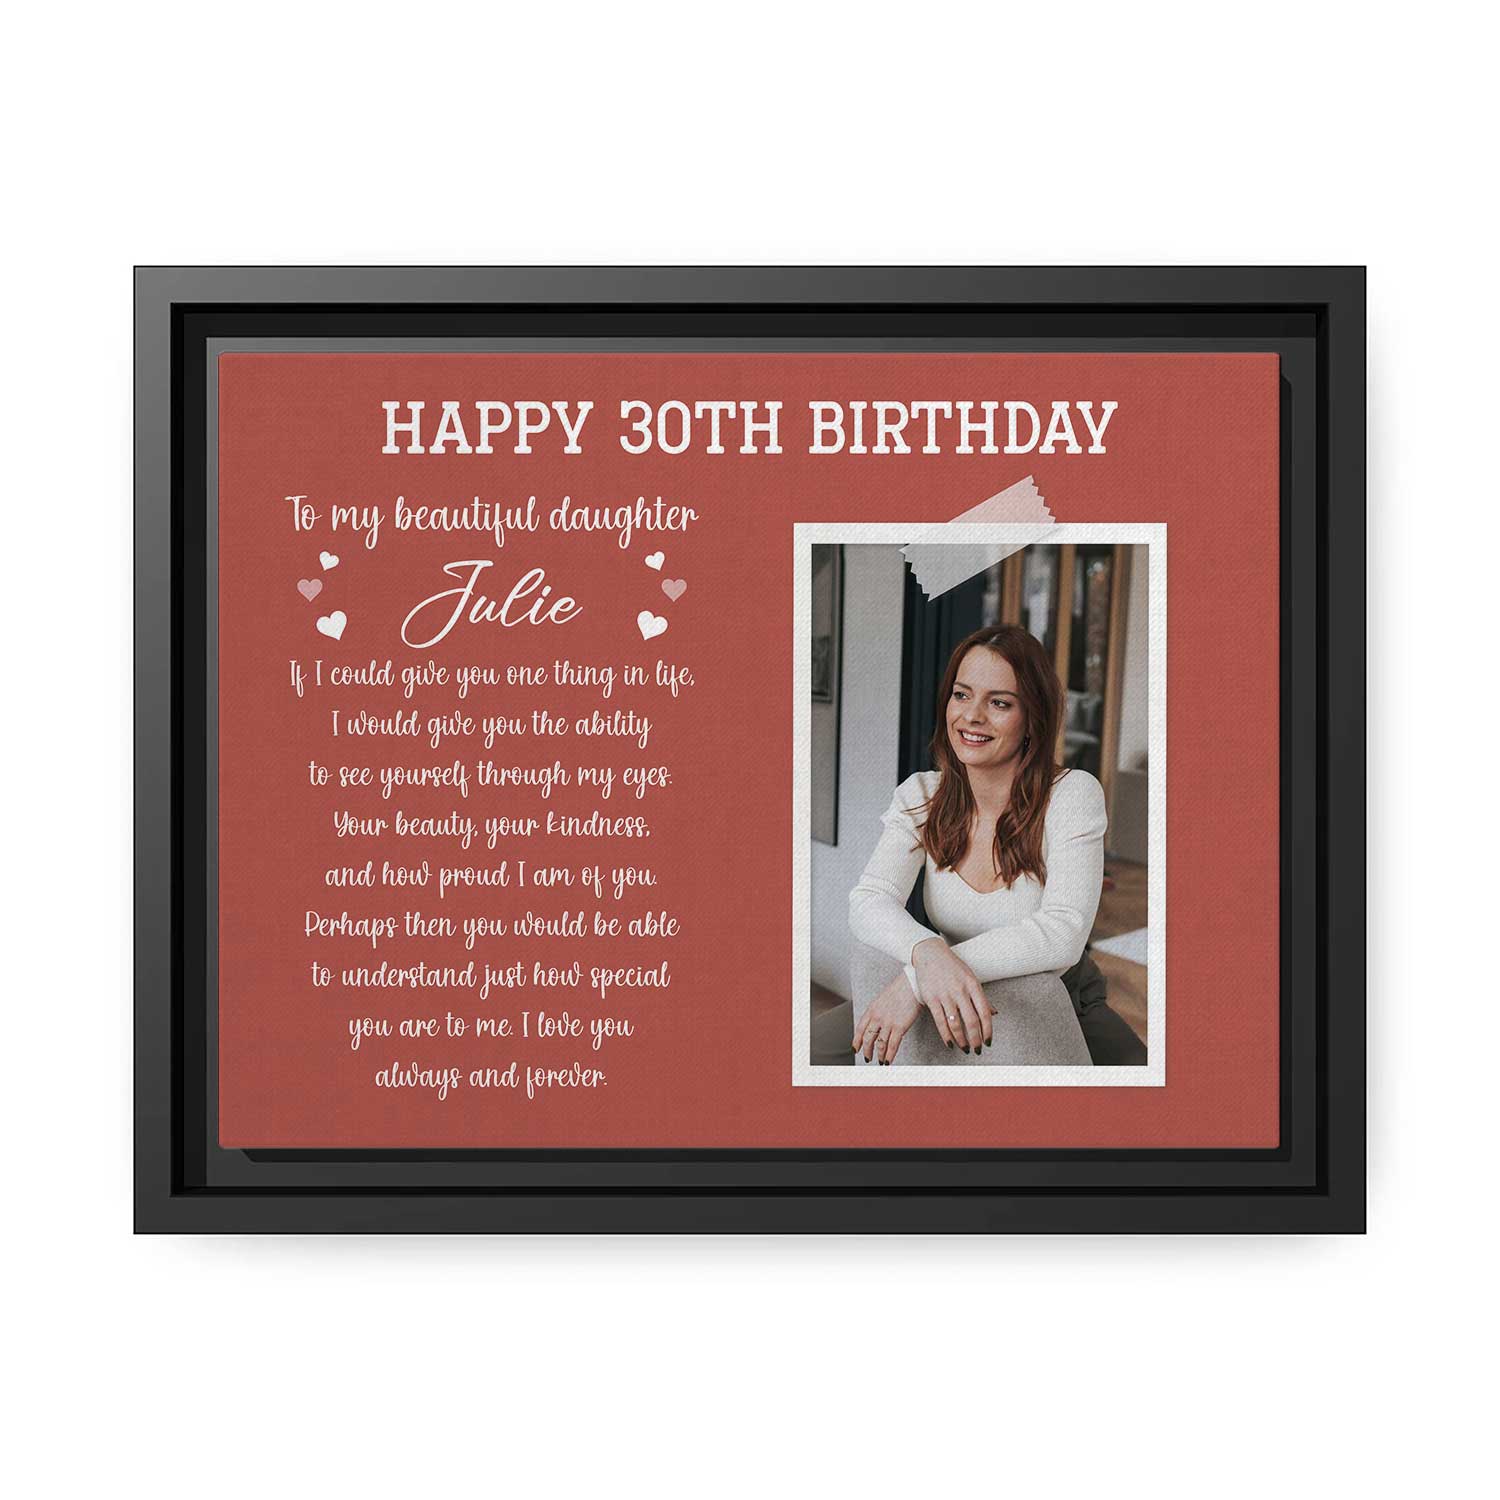 Happy 30th Birthday - Personalized 30th Birthday gift For Daughter - Custom Canvas Print - MyMindfulGifts